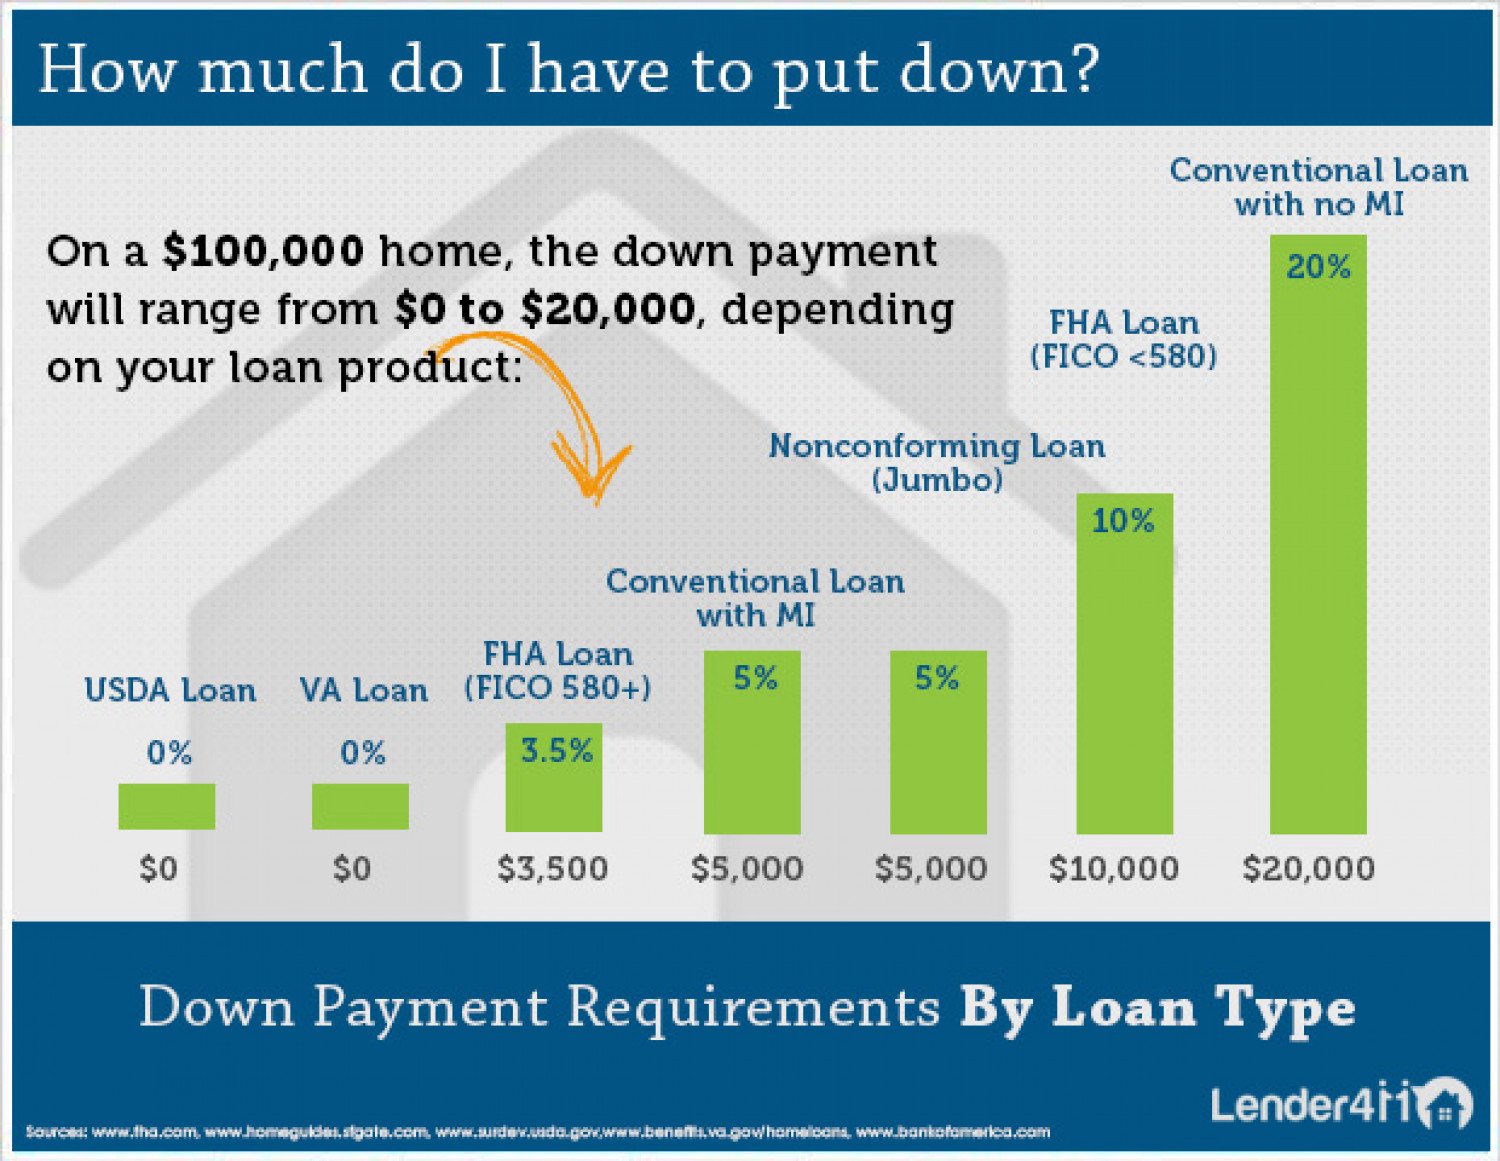 How Much Is My Down Payment?